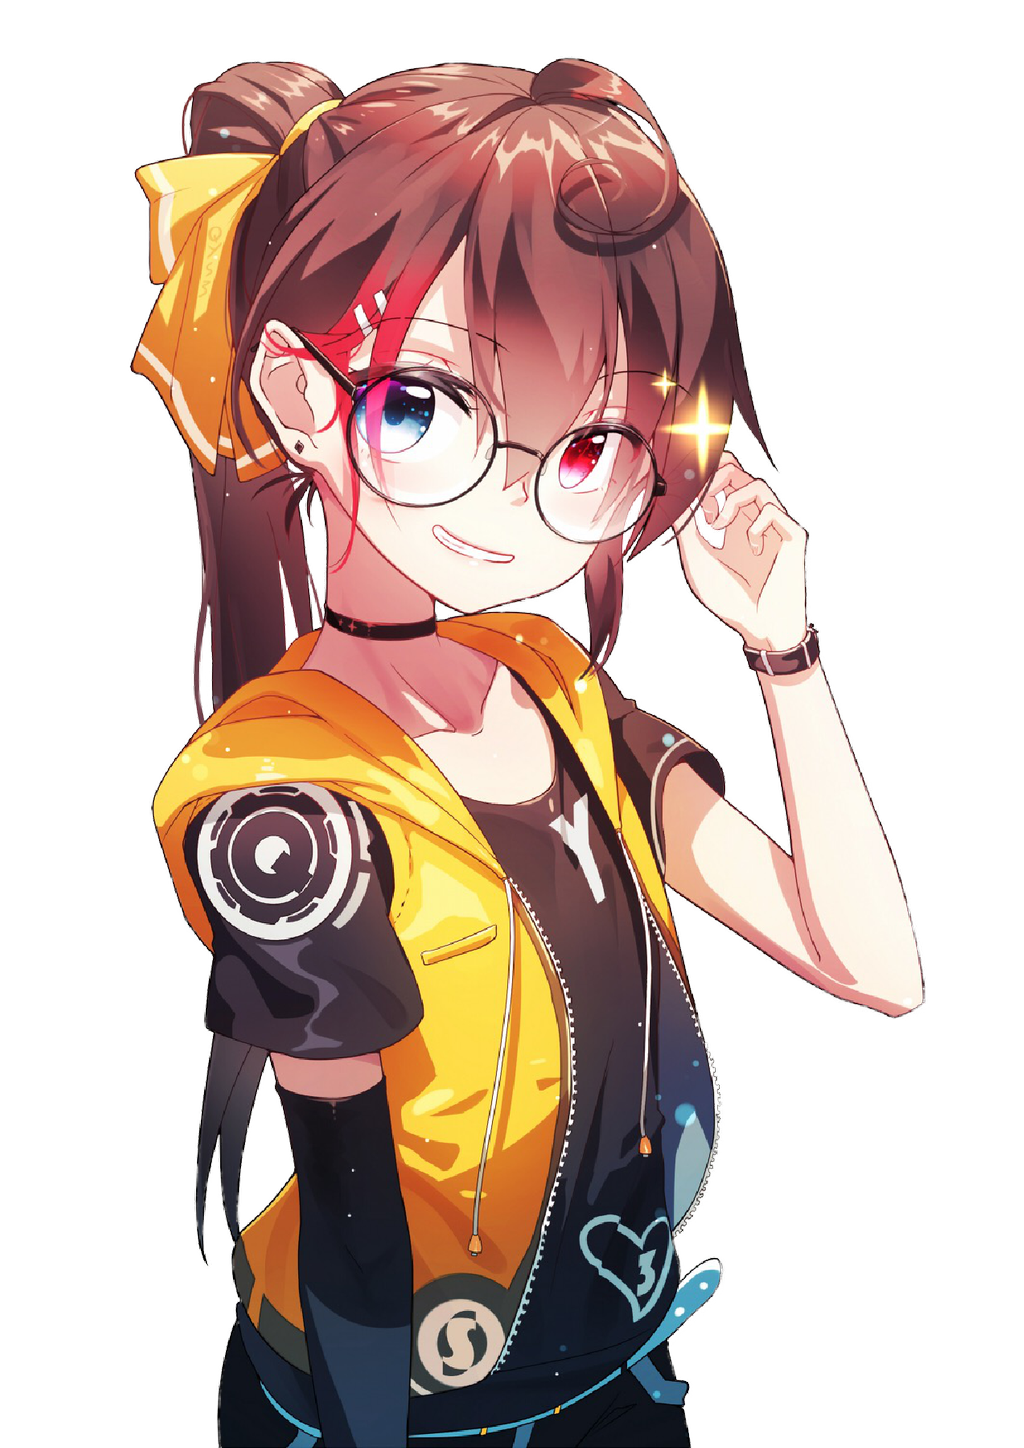 Cute Anime Girl PNG Image HD | PNG All